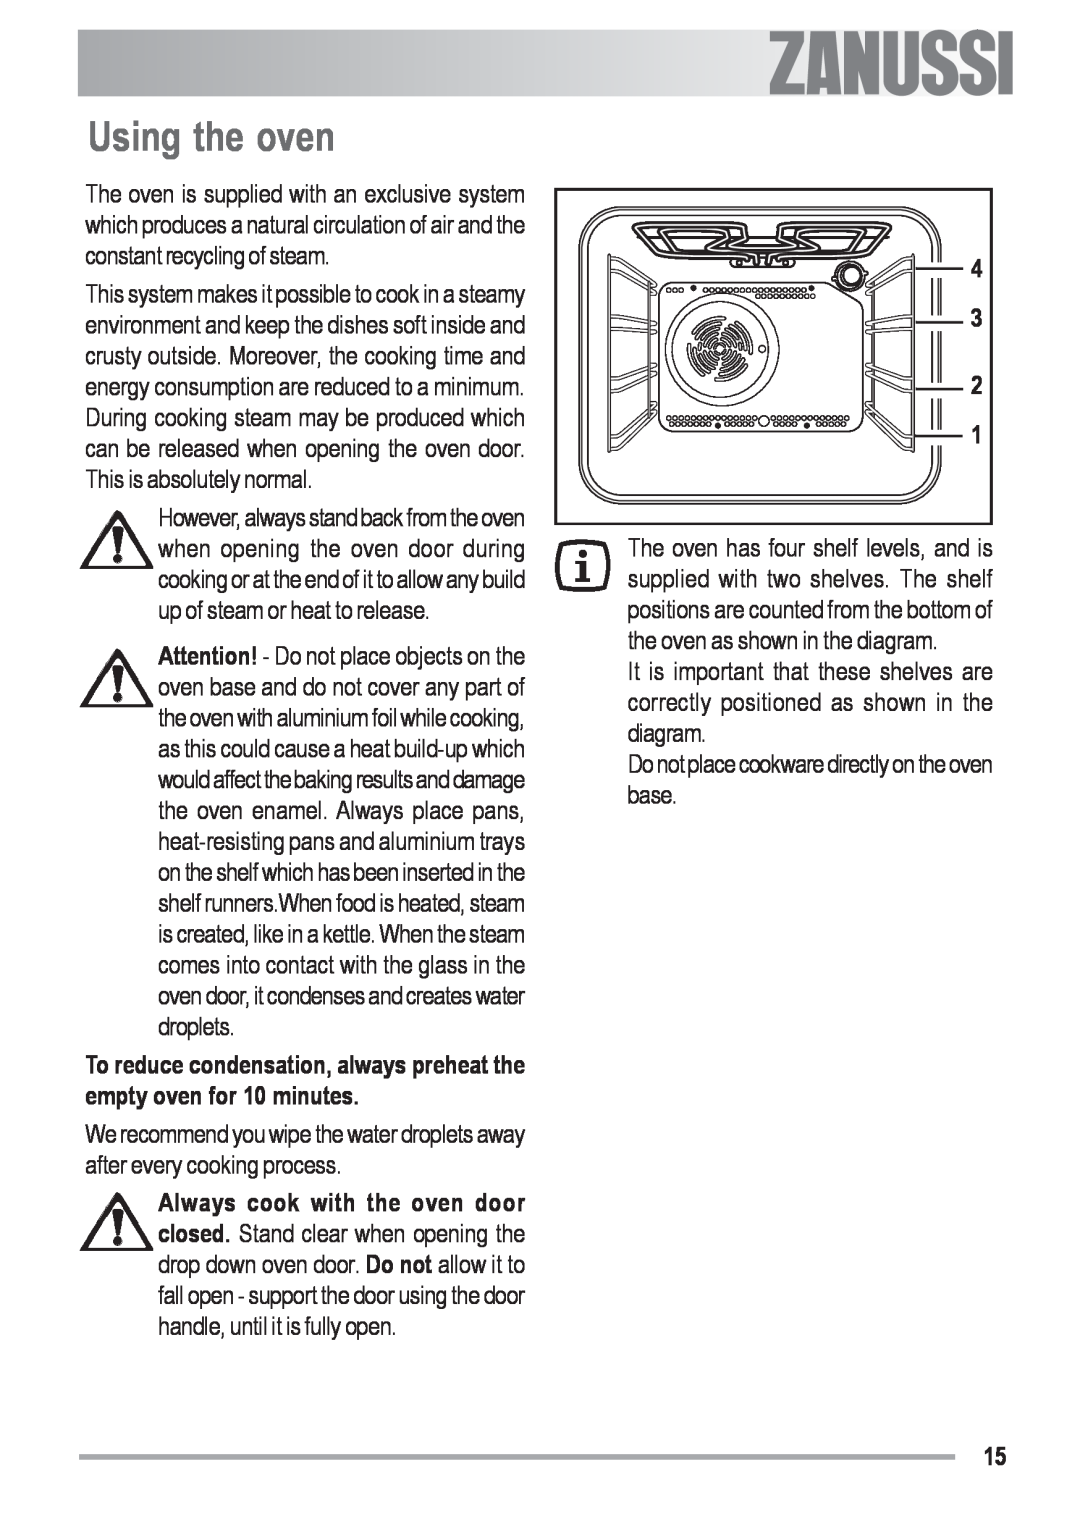 Zanussi ZOU 481 manual Using the oven, Do not place cookware directly on the oven base, electrolux 